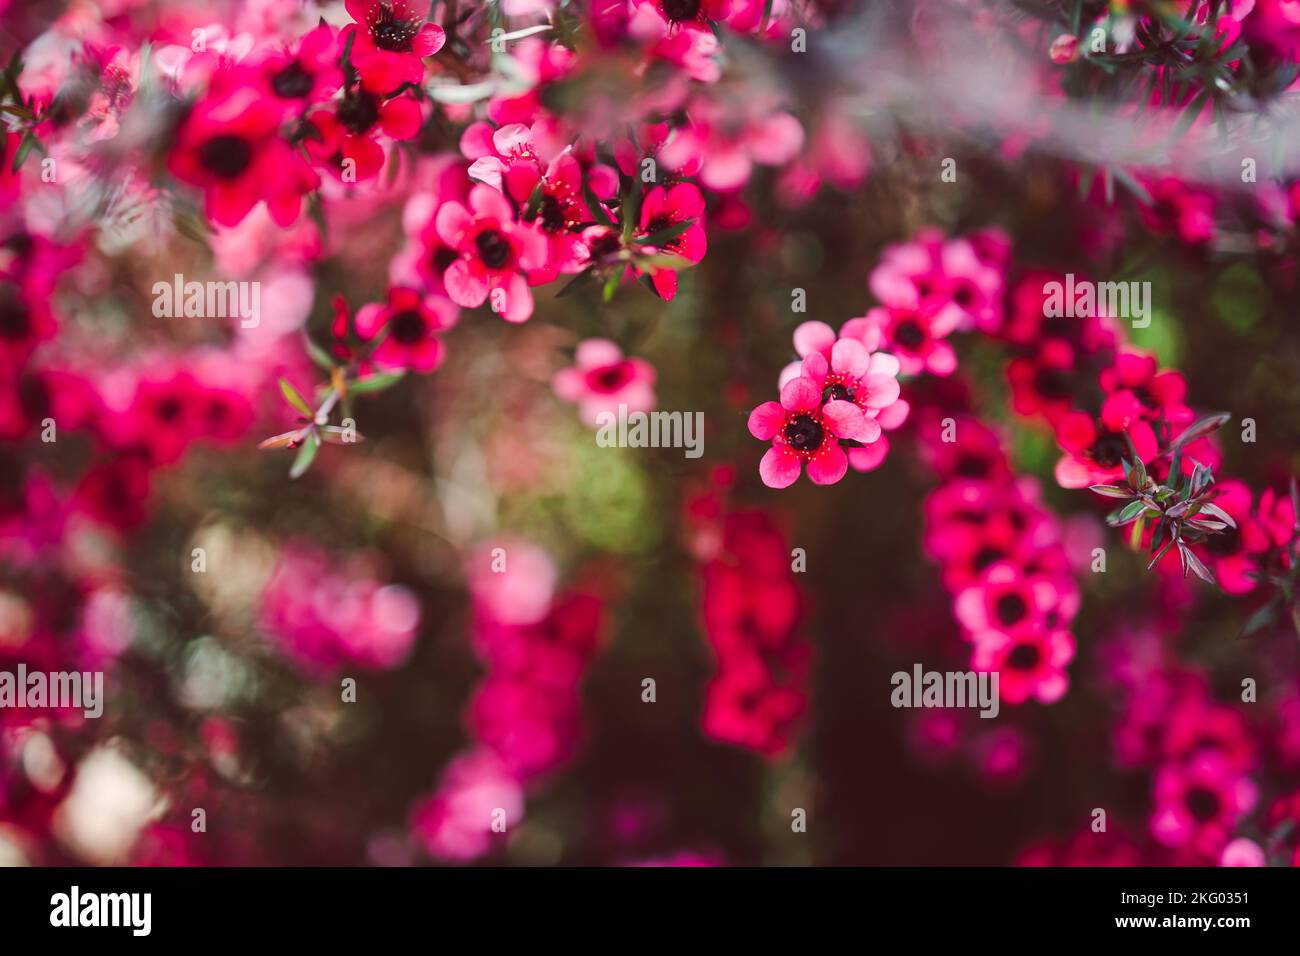 close-up of pink flowers flom a New Zealand Tea Bush plant with dark leaves shot at shallow depth of field Stock Photo